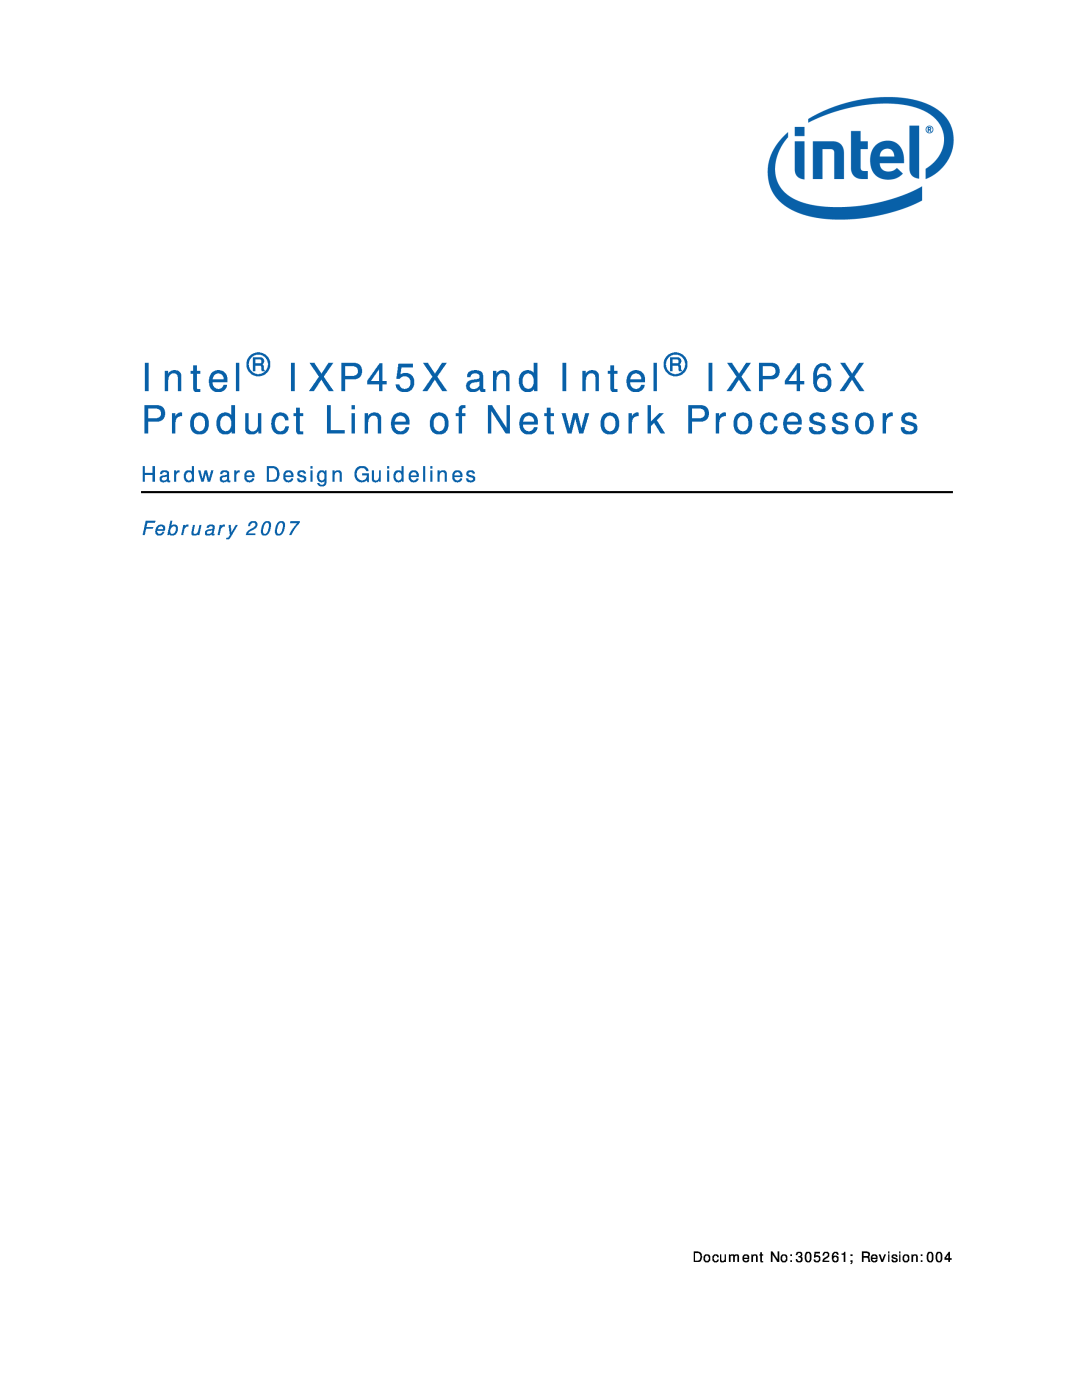 Intel IXP45X, IXP46X manual Hardware Design Guidelines, February, Document No 305261 Revision 